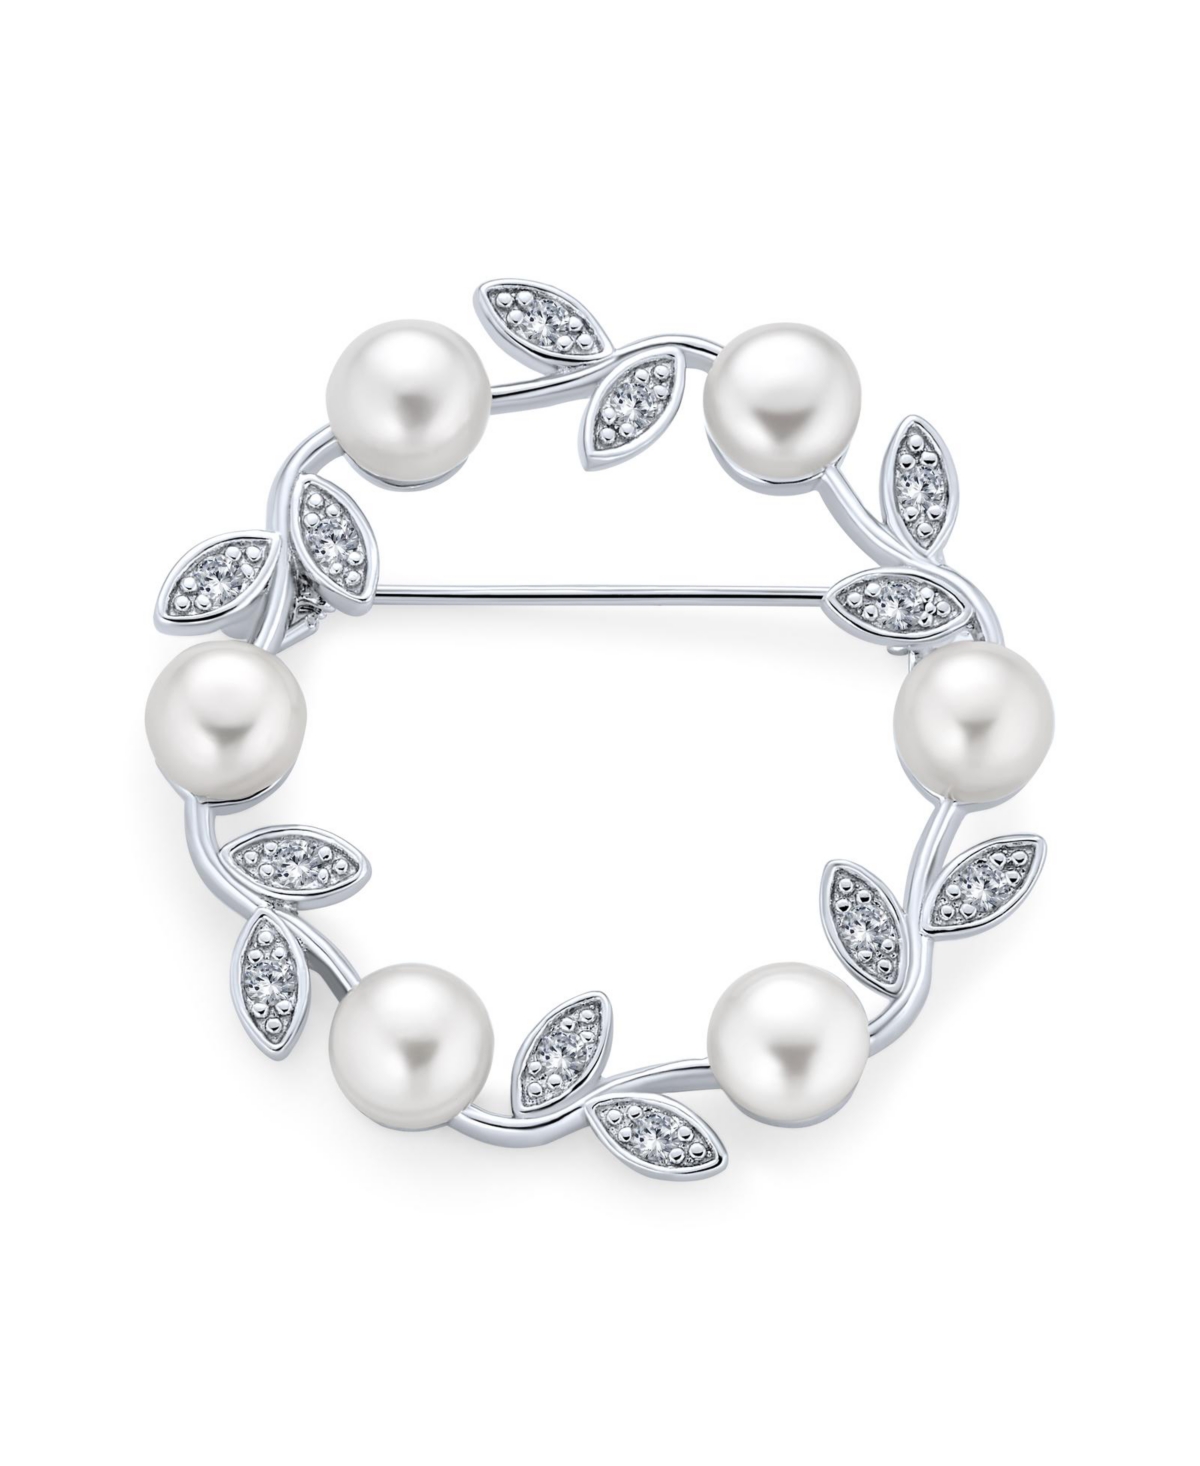 Elegant Classic White 7MM Freshwater Cultured Pearl Circle Leaf Scarf Brooch Pin For Women Wedding.925 Sterling Silver - White